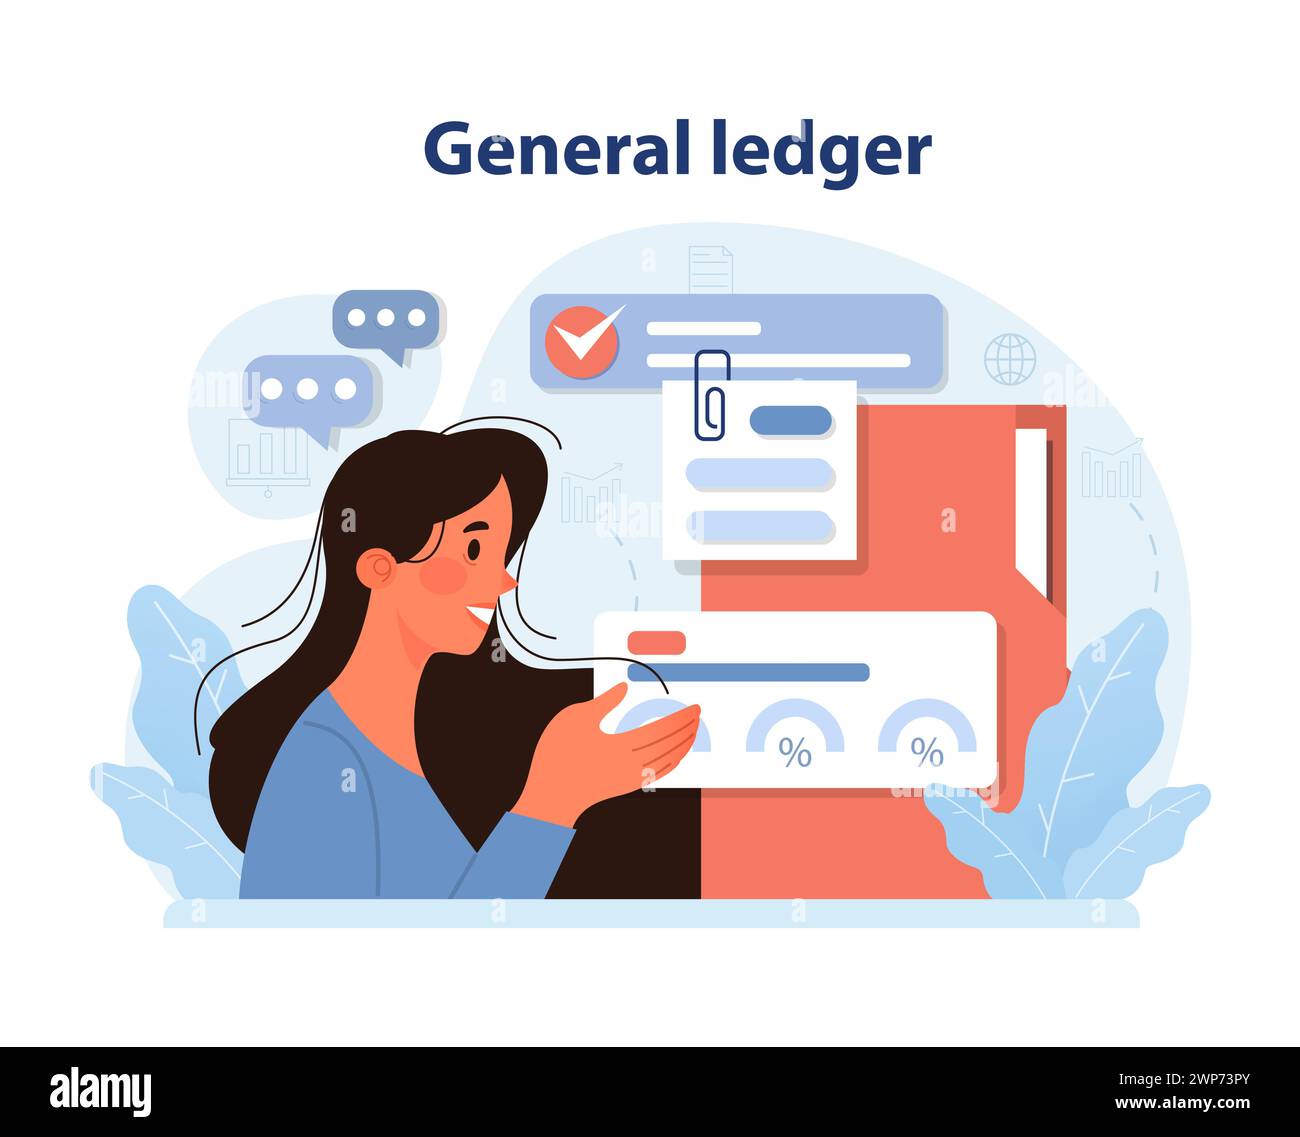 Expertly navigating the general ledger. Woman interacts with digital financial records, percentages, and checkmarks. Comprehensive bookkeeping insight. Flat vector illustration. Stock Vector